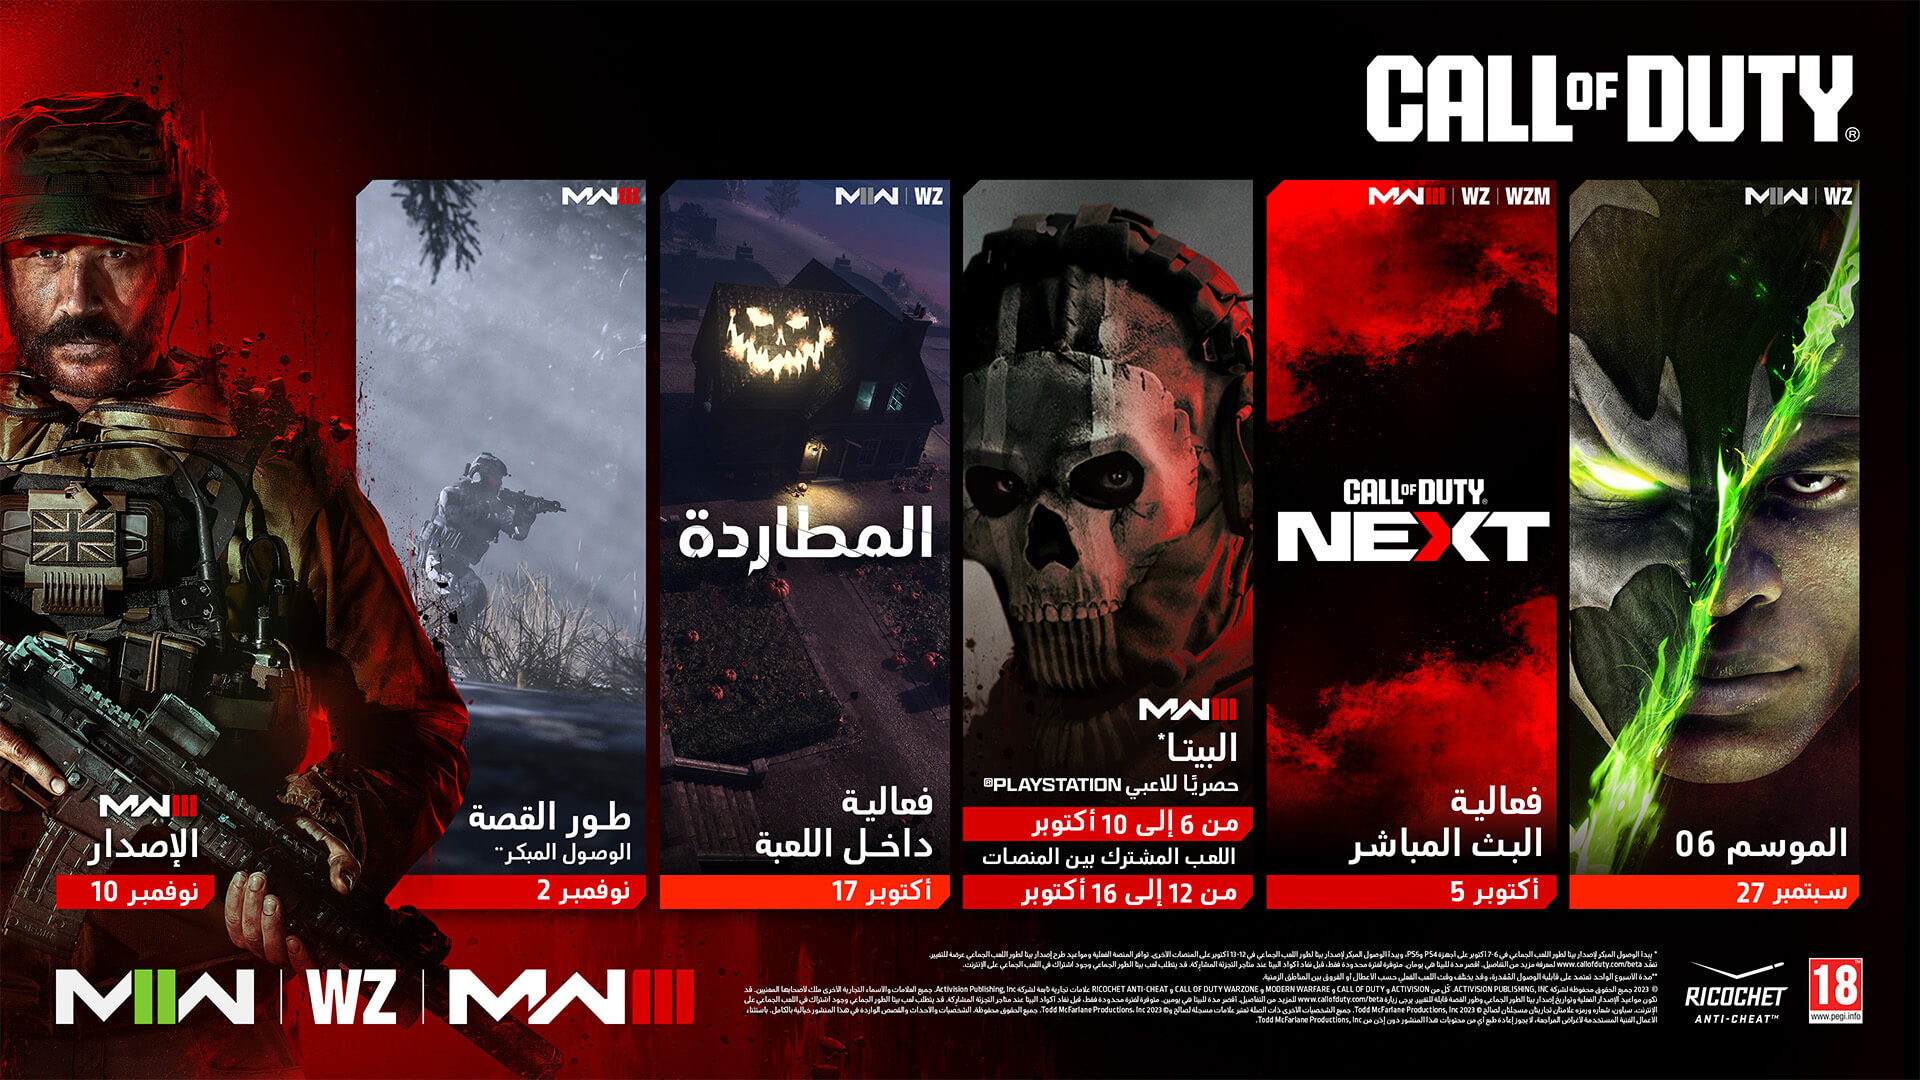 <p>CALL OF DUTY®. MWII | WZ. Al Simmons Spawn key art. SEASON 06. MWIII | WZ | WZM. Call of Duty NEXT key art. LIVE STREAM EVENT. OCT 5. MWIII. BETA*. Playstation Exclusive. OCT 6 - 10. Crossplays. OCT 12 - 16. MWII | WZ. The Haunting. In-Game Event. OCT 17. MWIII. Campaign Early Access. NOV 2. MWIII. Launch. NOV 10. Warzone logo. Modern Warfare II logo. Modern Warfare III logo. Ricochet logo. Ratings logo. © 2023 Activision Publishing, Inc. ACTIVISION, CALL OF DUTY, MODERN WARFARE, CALL OF DUTY WARZONE, and RICOCHET ANTI-CHEAT are trademarks of Activision Publishing, Inc. All other trademarks and trade names are the property of their respective owners. Actual launch date(s) of MP Beta and Campaign early access subject to change. Actual platform availability of MP Beta subject to change. See http://www.callofduty.com/beta for more details.Minimum open Beta duration is 2 days. Limited time only. While early access Beta codes last. At participating retailers. Online multiplayer subscription may be required for MP Beta. Spawn, its logo and its symbol are registered trademarks. © 2023 Todd McFarlane Productions, Inc. All other related characters are TM and © 2023 Todd McFarlane Productions, Inc. All rights reserved. The characters, events and stories in this publication are entirely fictional. With exception of artwork used for review purposes, none of the contents of this publication may be reprinted without the permission of Todd McFarlane Productions, Inc.</p>
